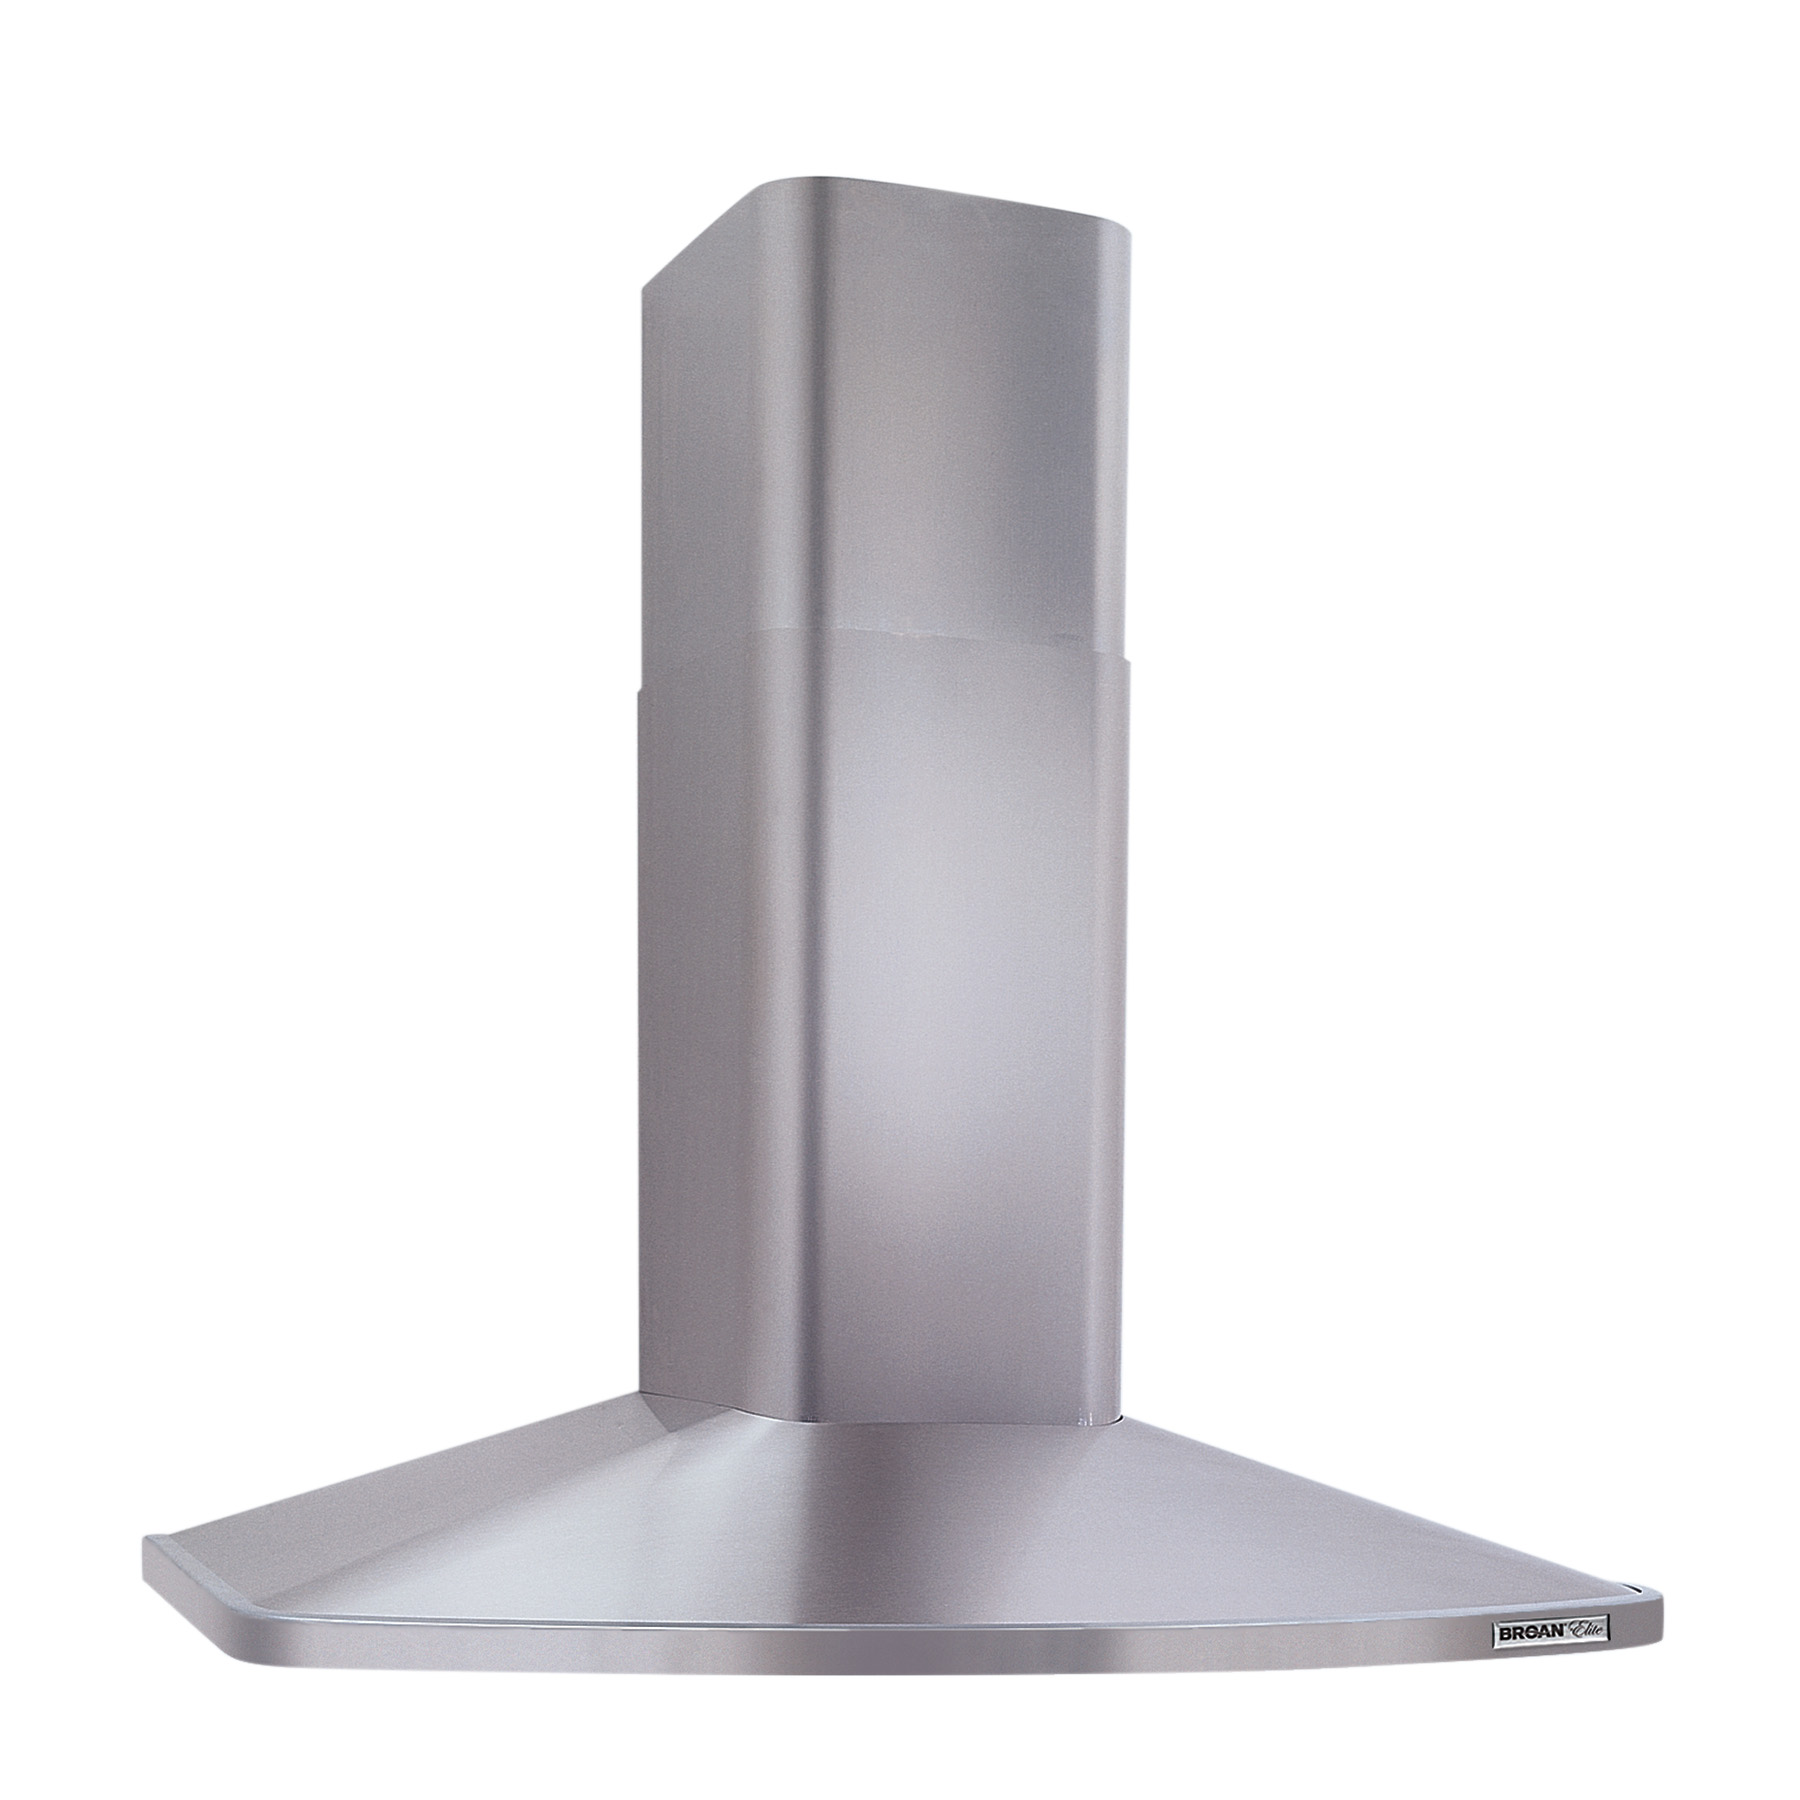 DISCONTINUED-Broan® 30-Inch Convertible Wall-Mount Chimney Range Hood Heat Sentry™, 370 CFM, Stainless Steel